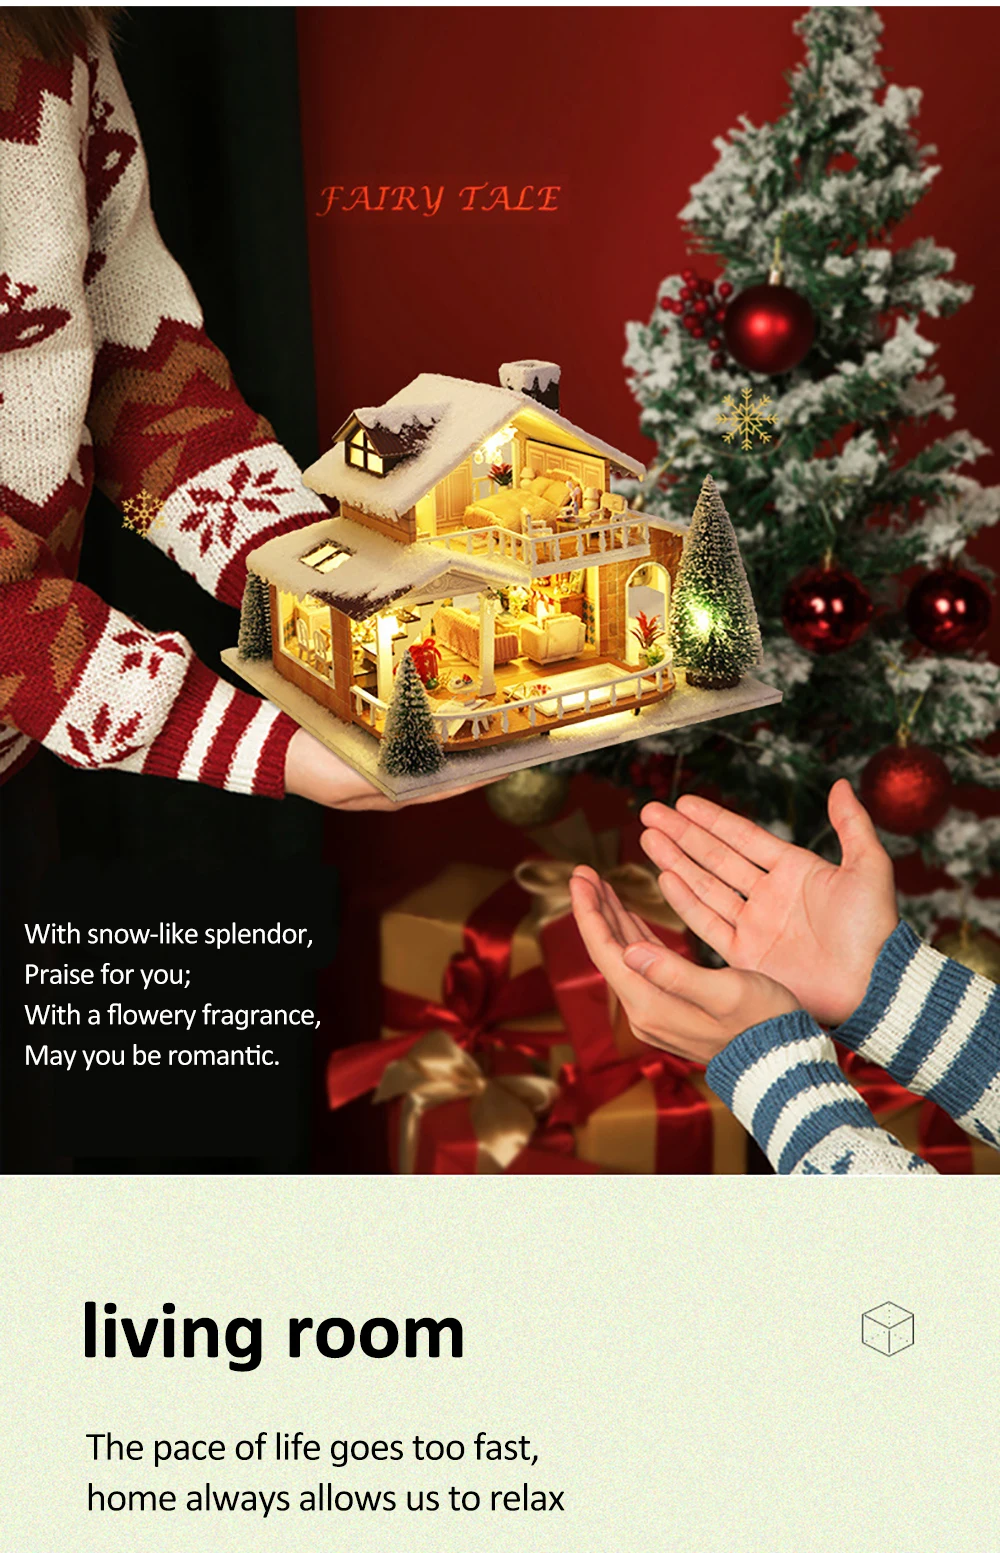 New Diy House Miniature Dollhouse Kit Christmas Carnival Building Model Room Box Wood Doll House Furniture Kids Toys Adult Gifts